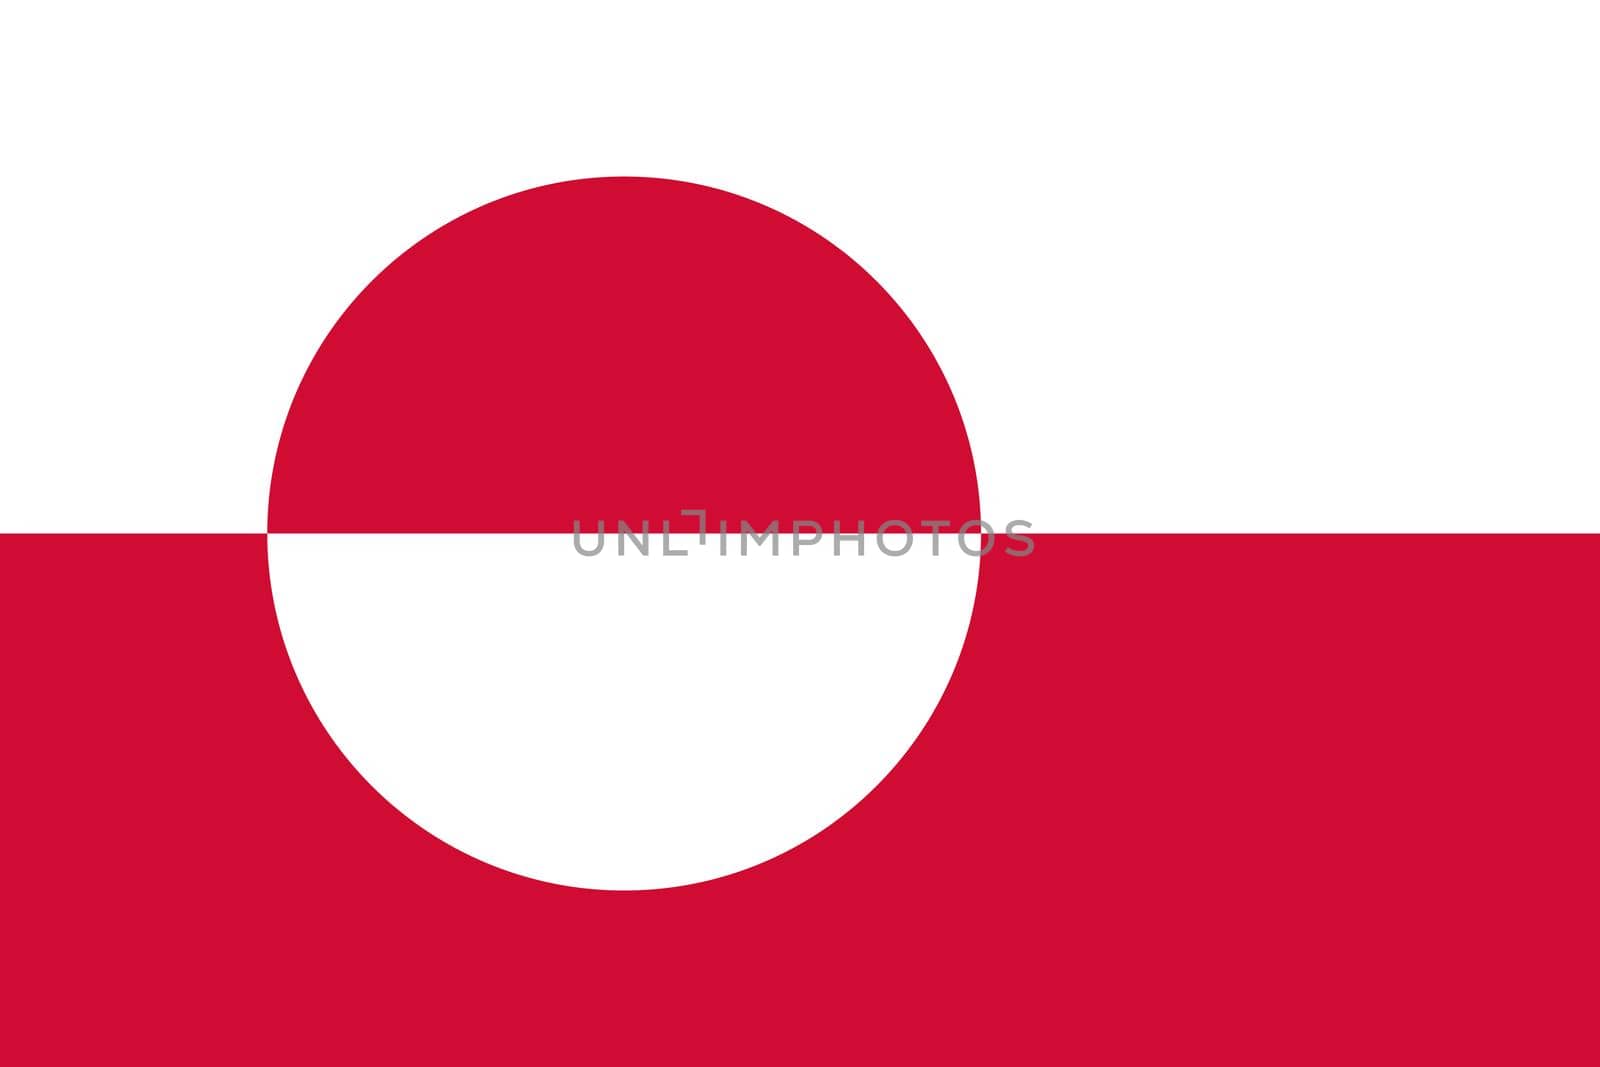 Greenland flag in real proportions and colors, vector by gladder